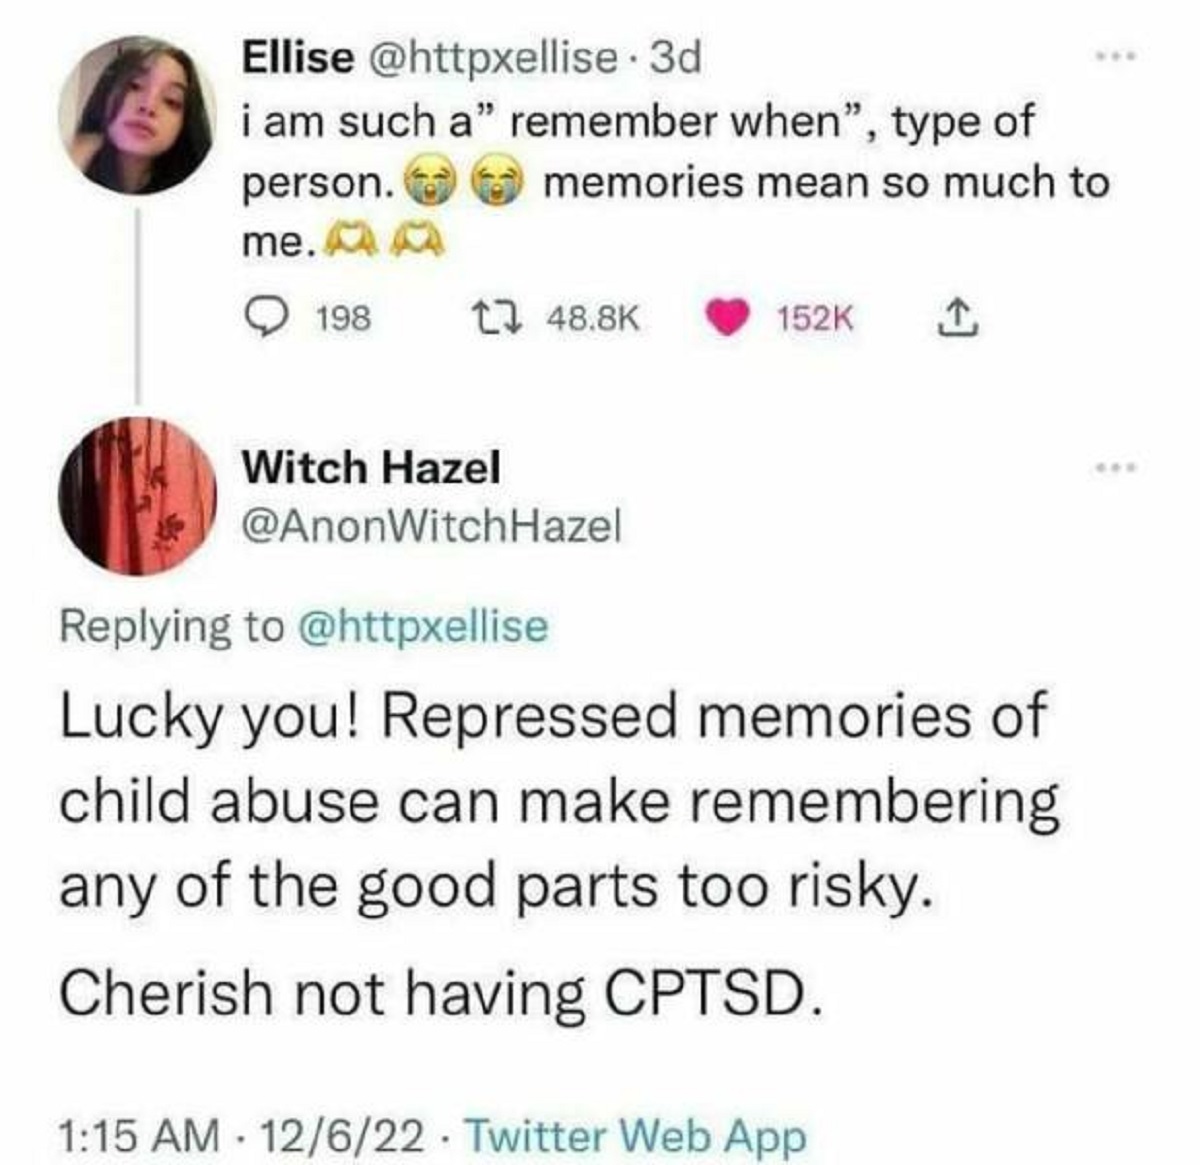 screenshot - Ellise . 3d i am such a" remember when", type of person. me. memories mean so much to 198 1 I Witch Hazel Hazel Lucky you! Repressed memories of child abuse can make remembering any of the good parts too risky. Cherish not having Cptsd. 12622